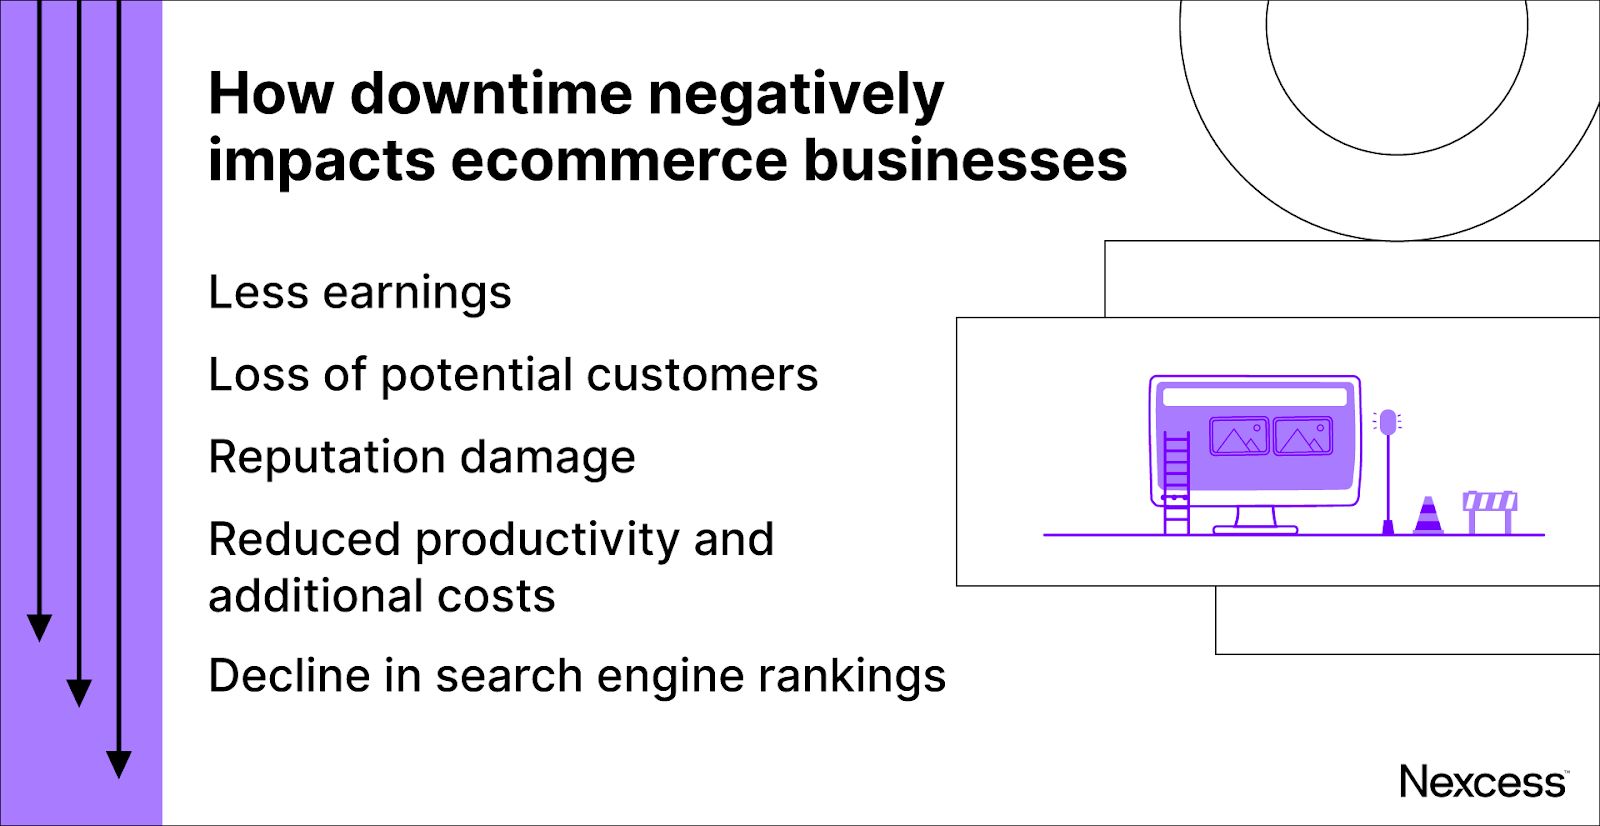 Ways in which downtime negatively impacts ecommerce businesses.